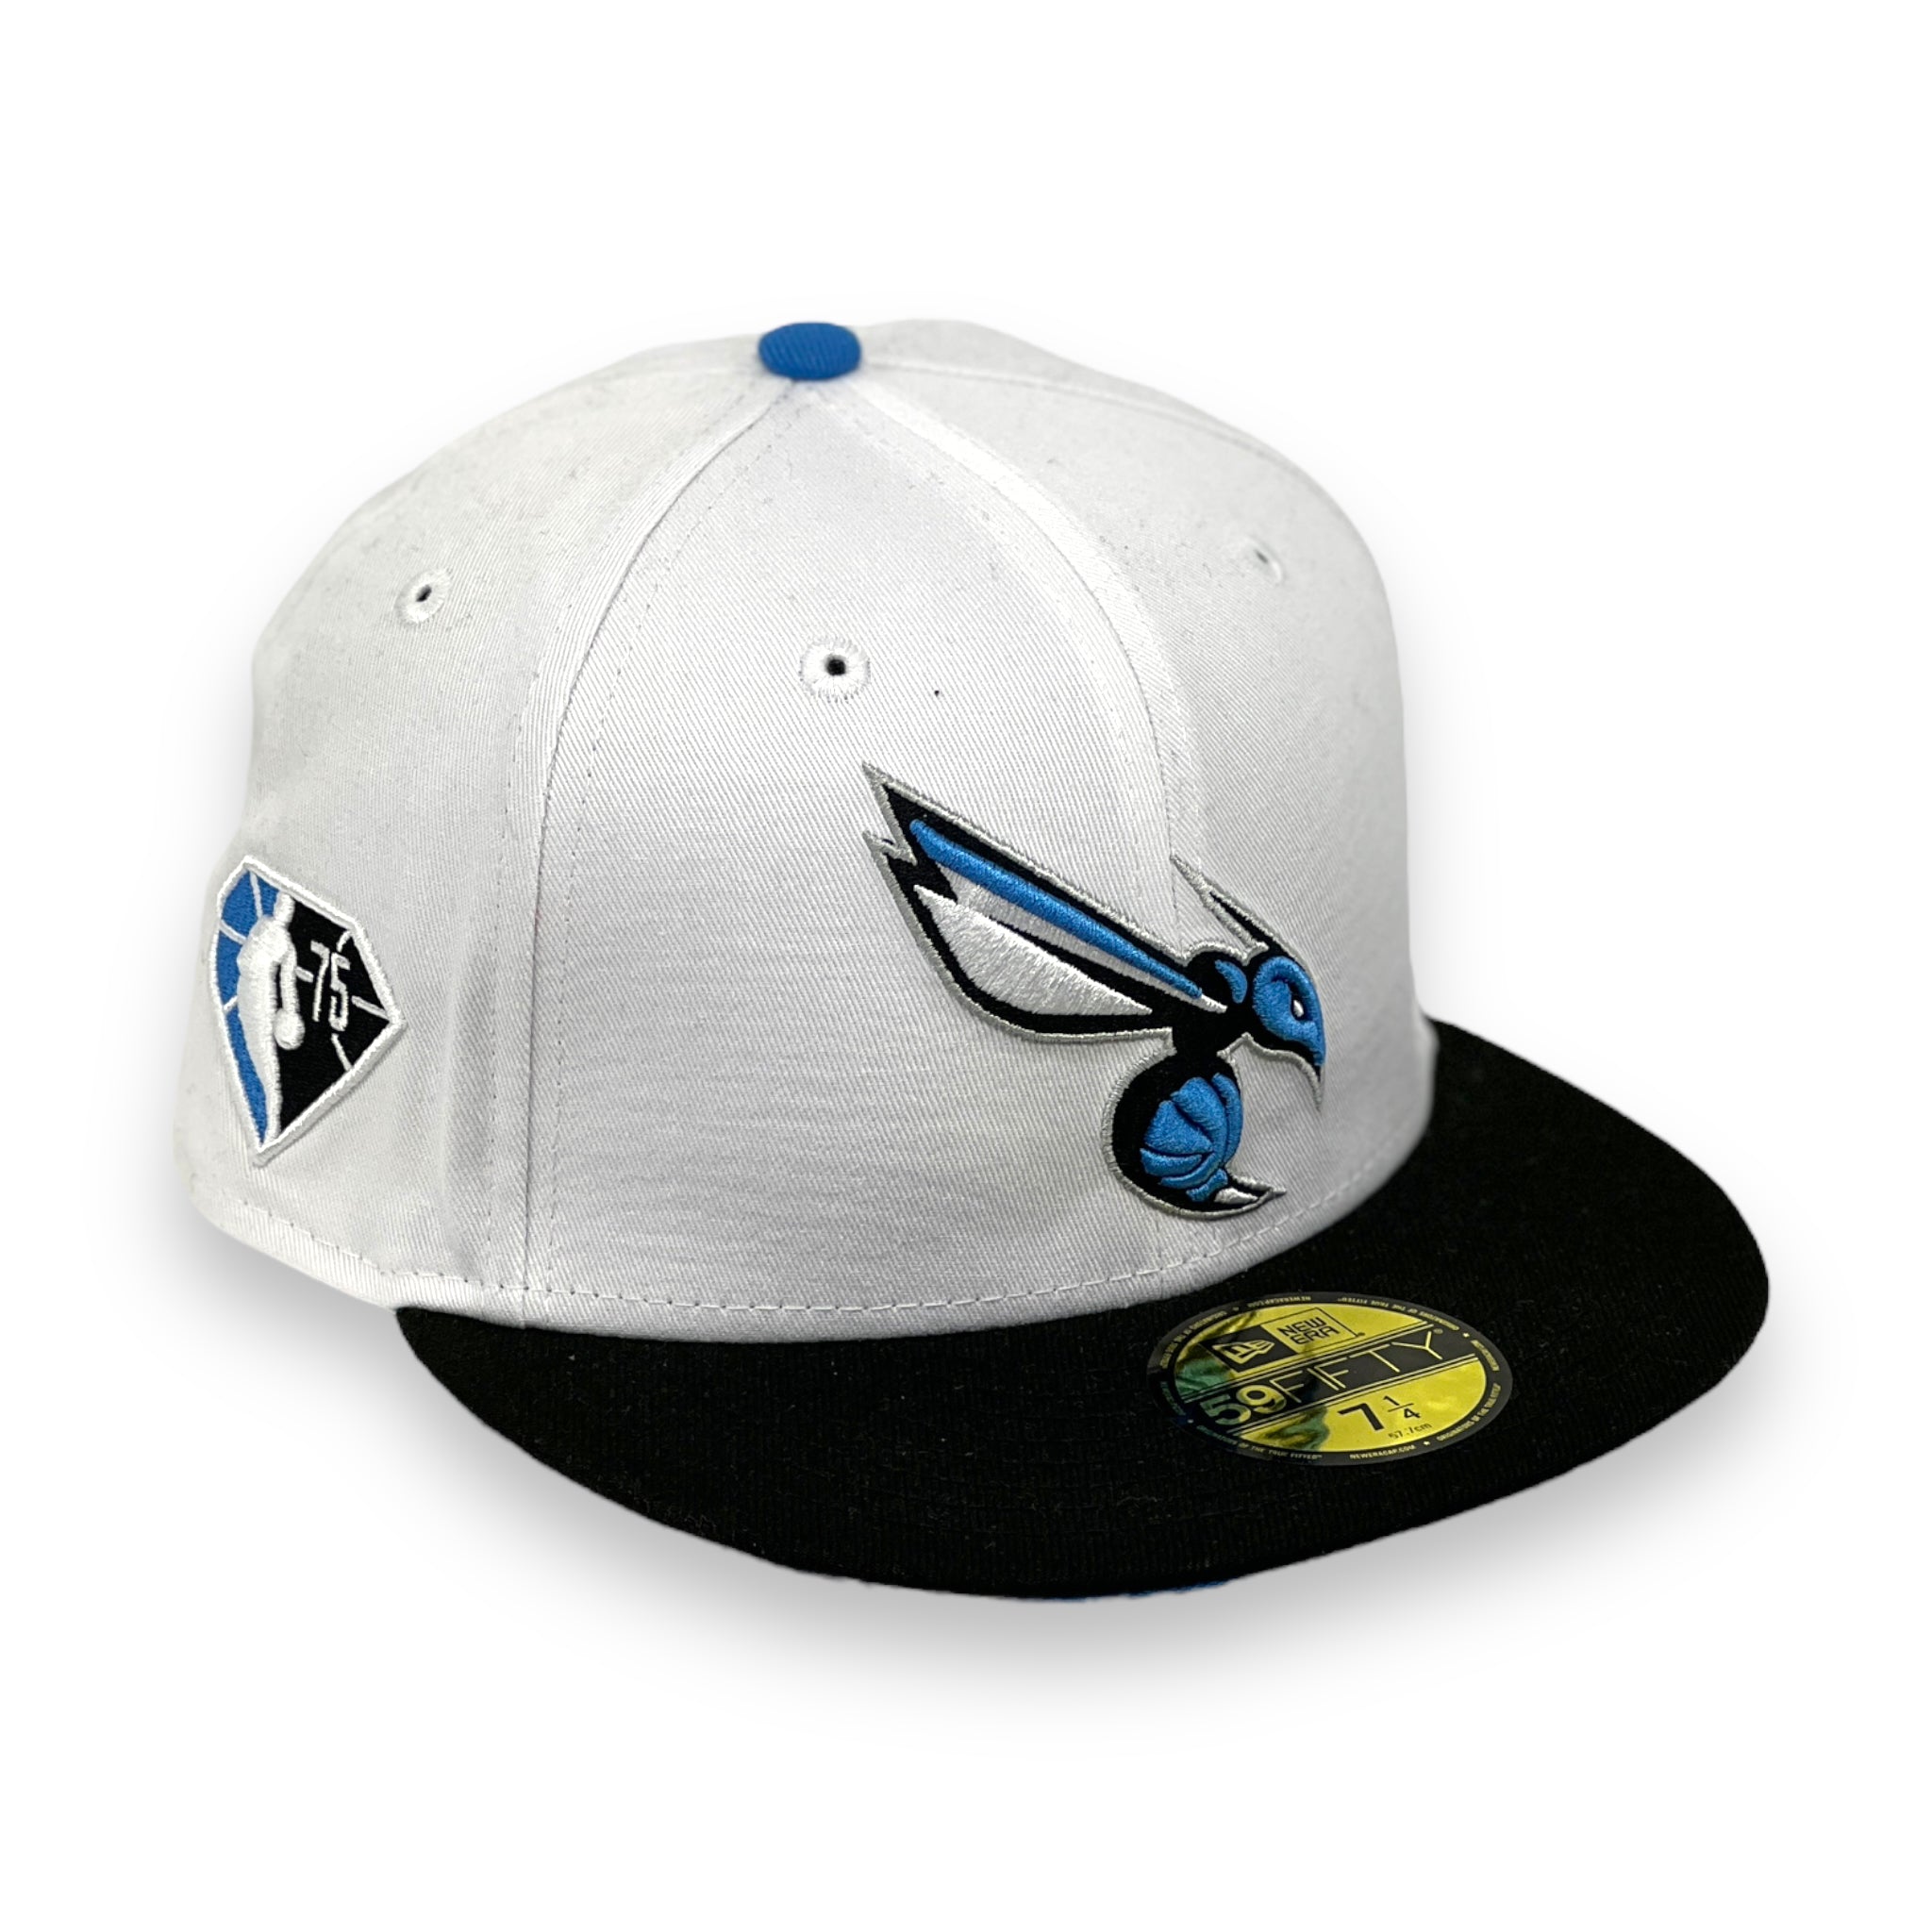 CHARLOTTE HORNETS "NBA 75TH ANNIVERSARY" NEW ERA 59FIFTY FITTED (AF-BLUE UNDER VISOR)